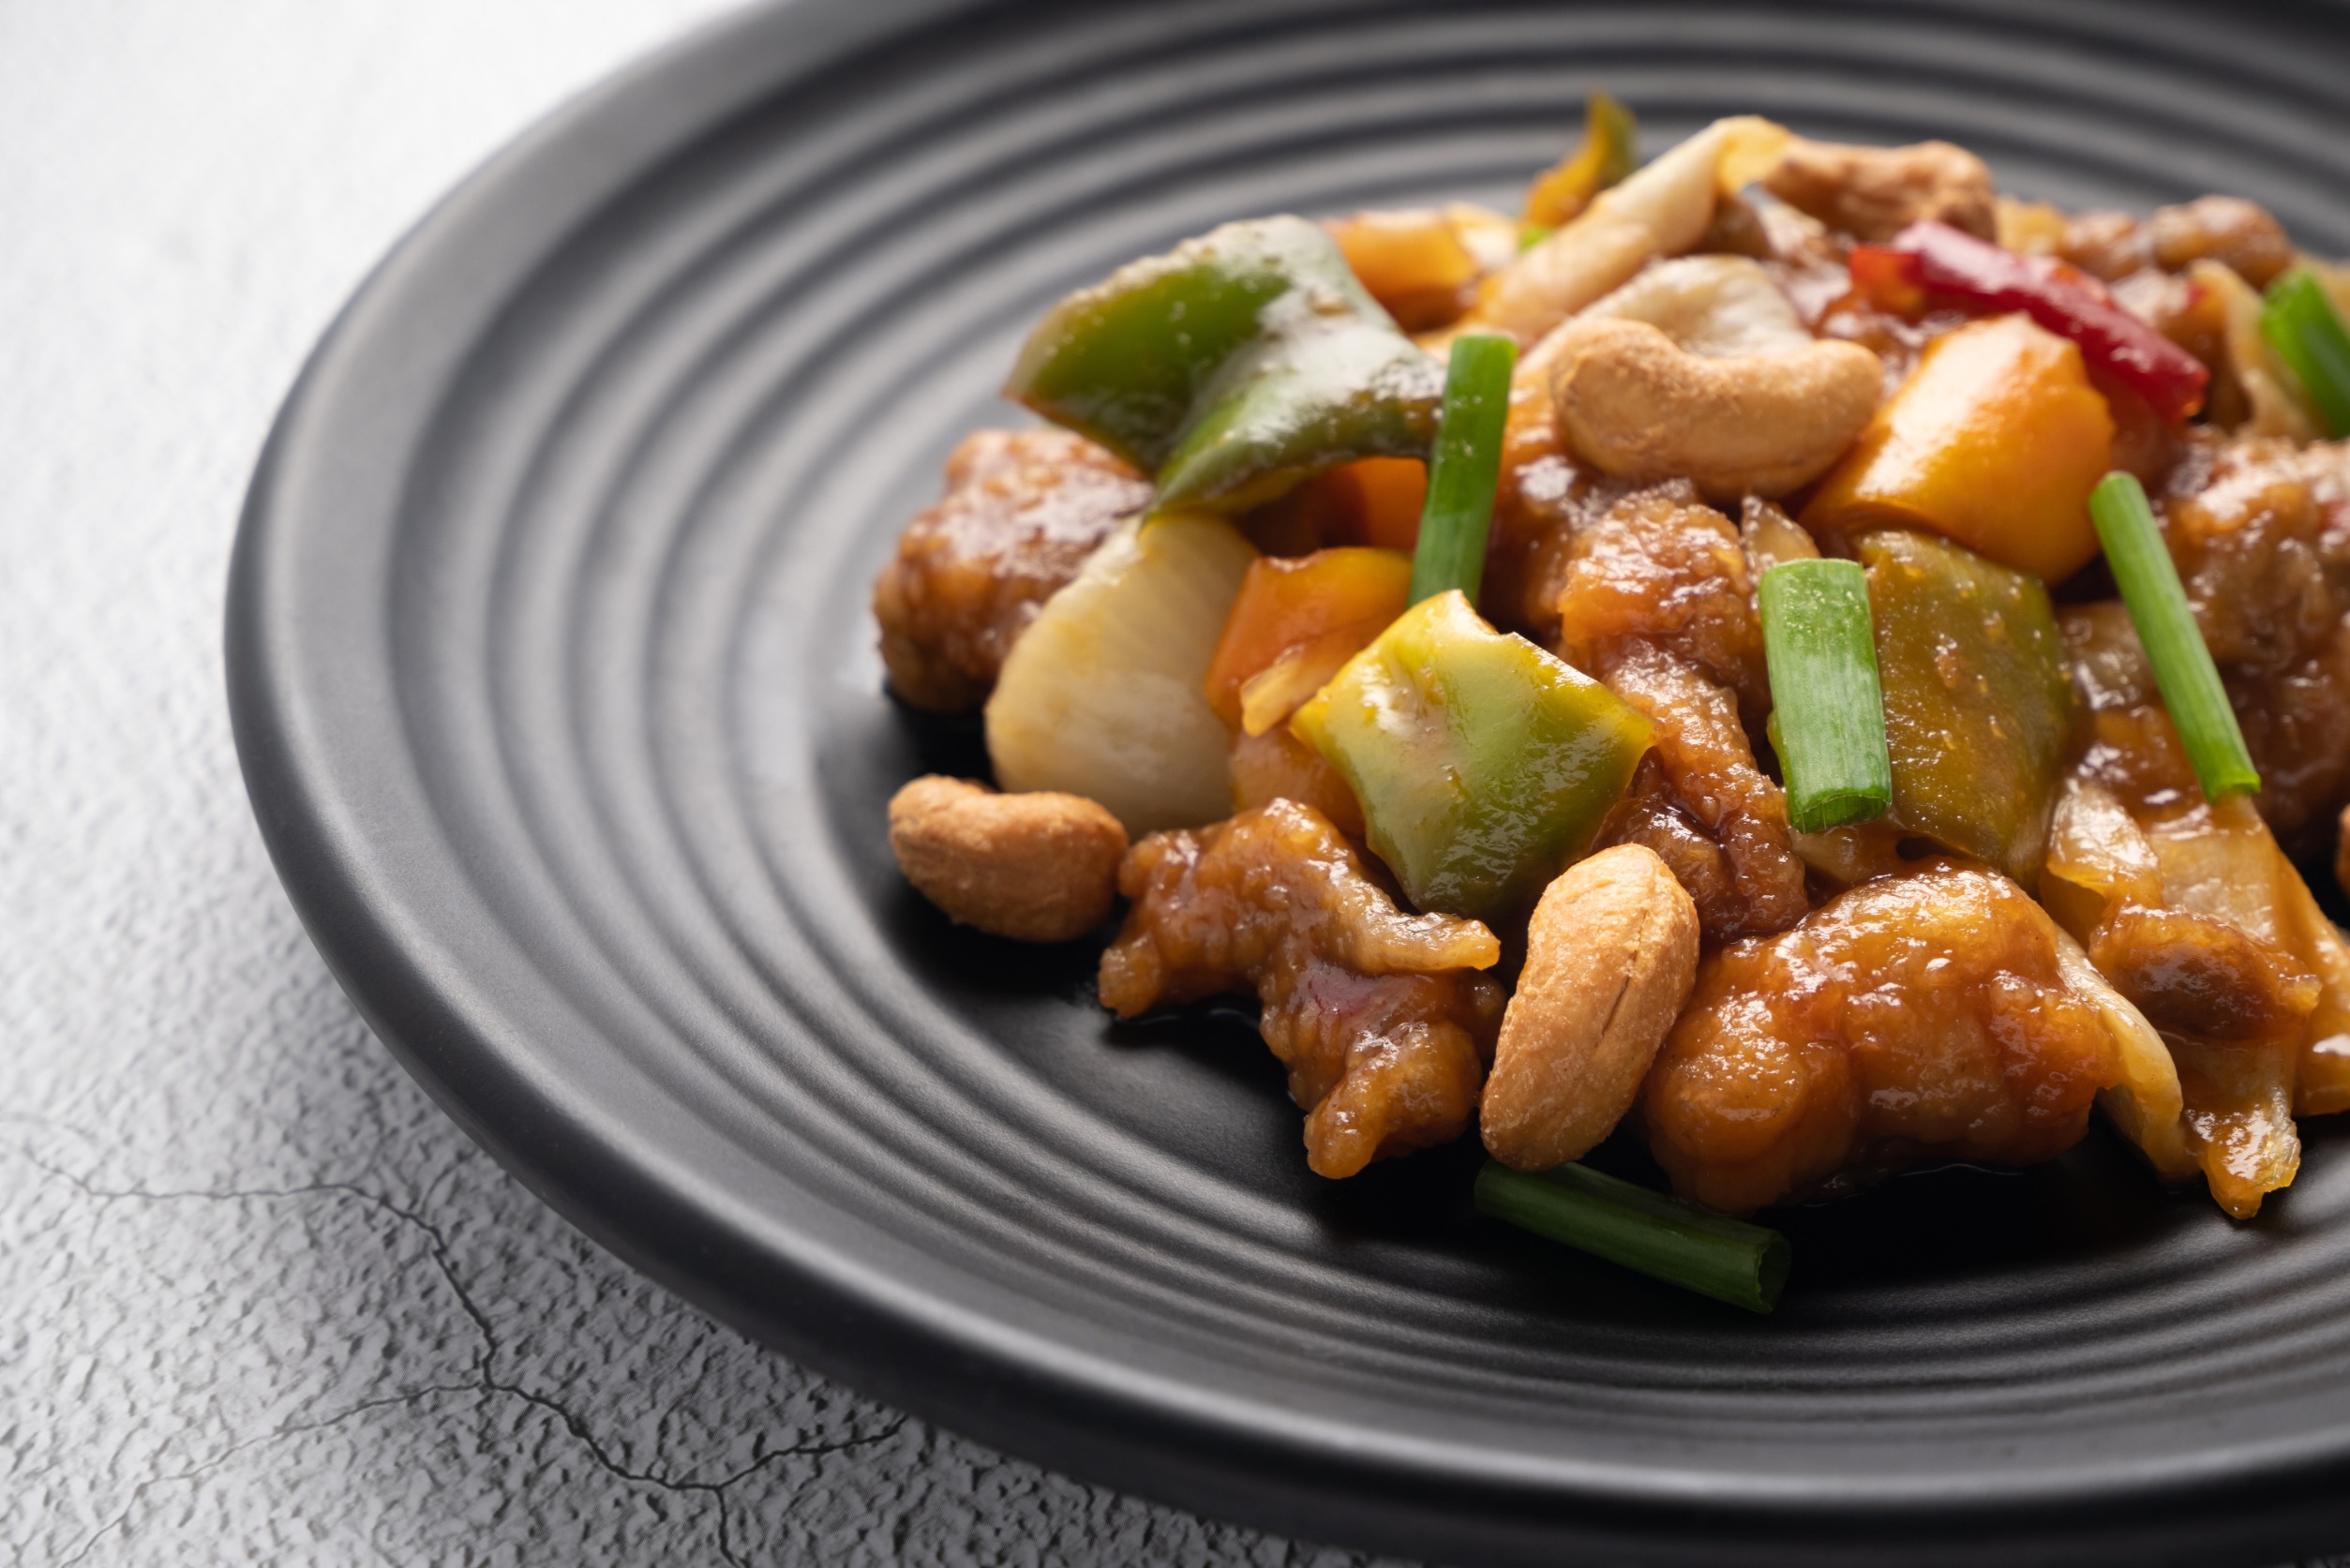 Stir fried chicken with cashew nuts in black dish on concrete table.